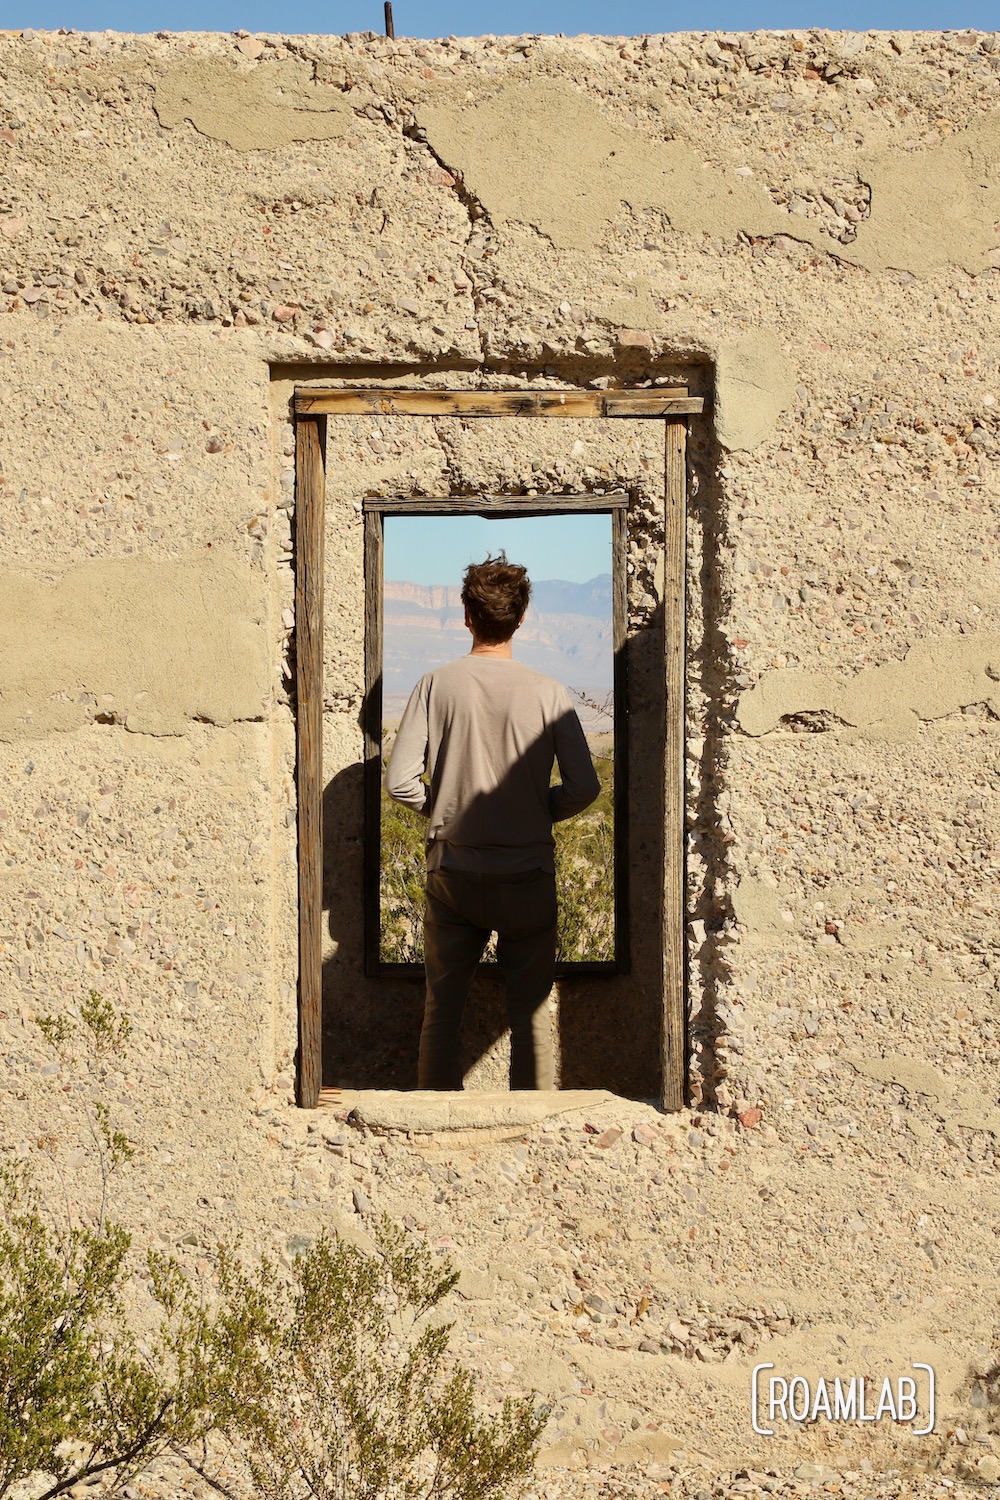 Man framed in the windows of an old stucco building.